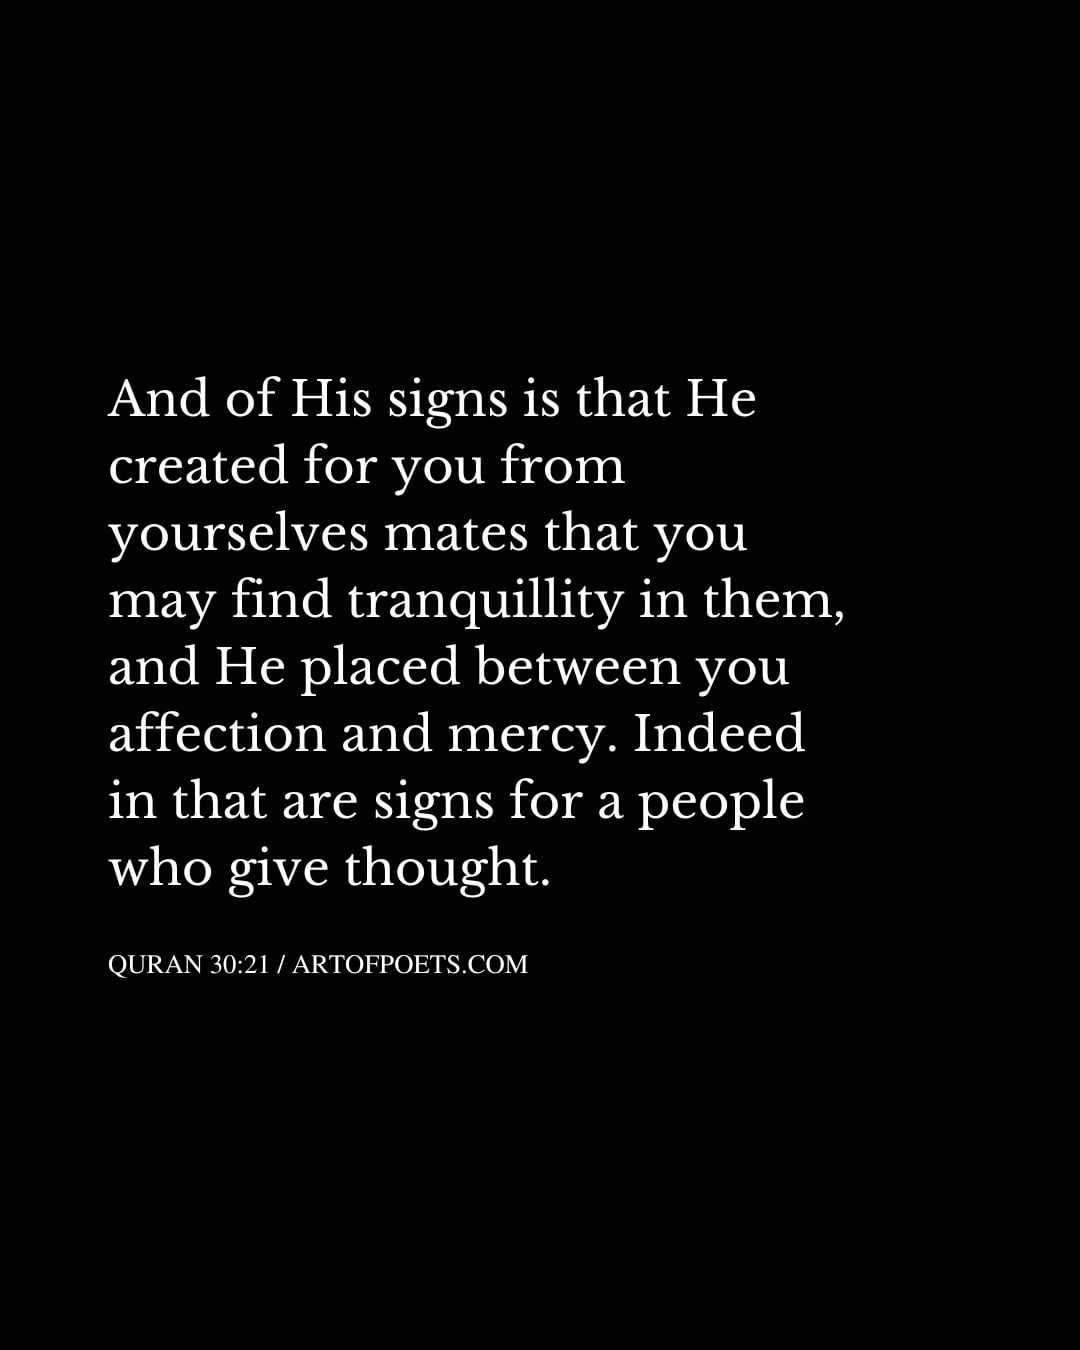 And of His signs is that He created for you from yourselves mates that you may find tranquillity in them and He placed between you affection and mercy